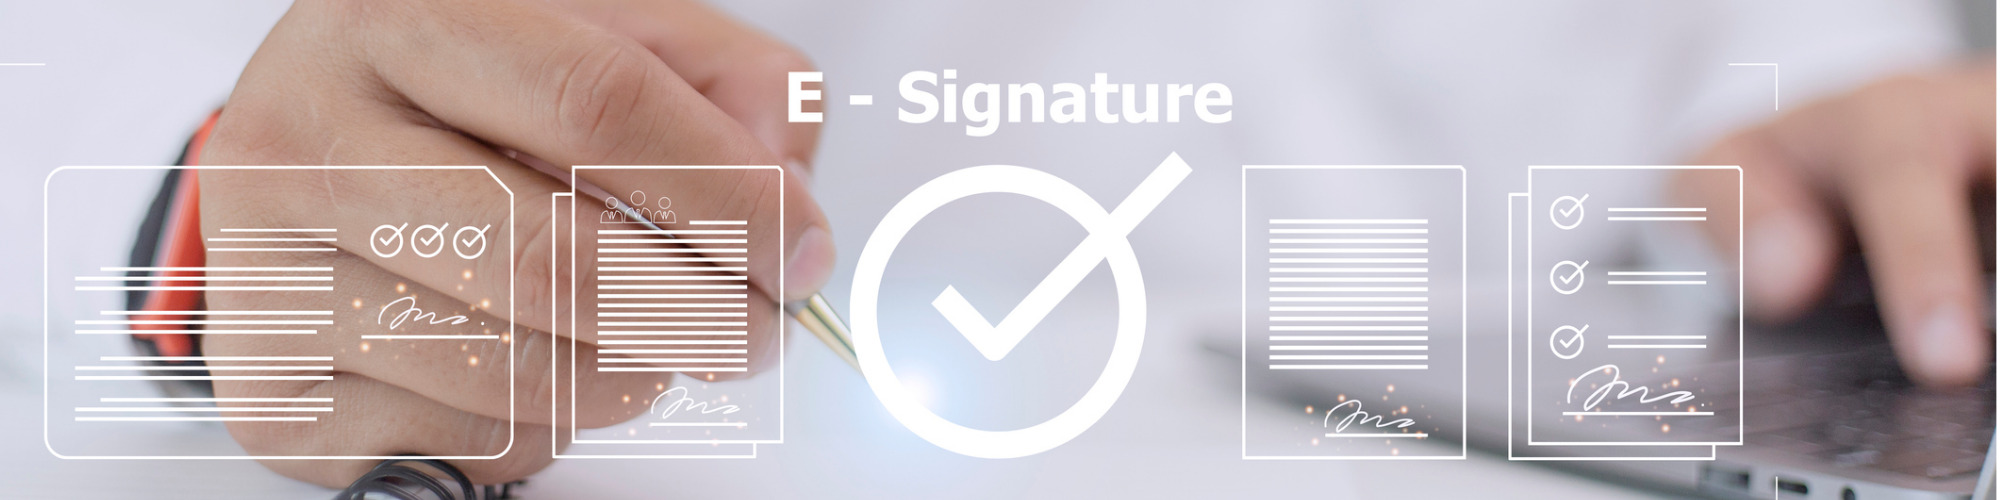 Electronic Signatures in Commercial Property Transactions - The Latest Guidance